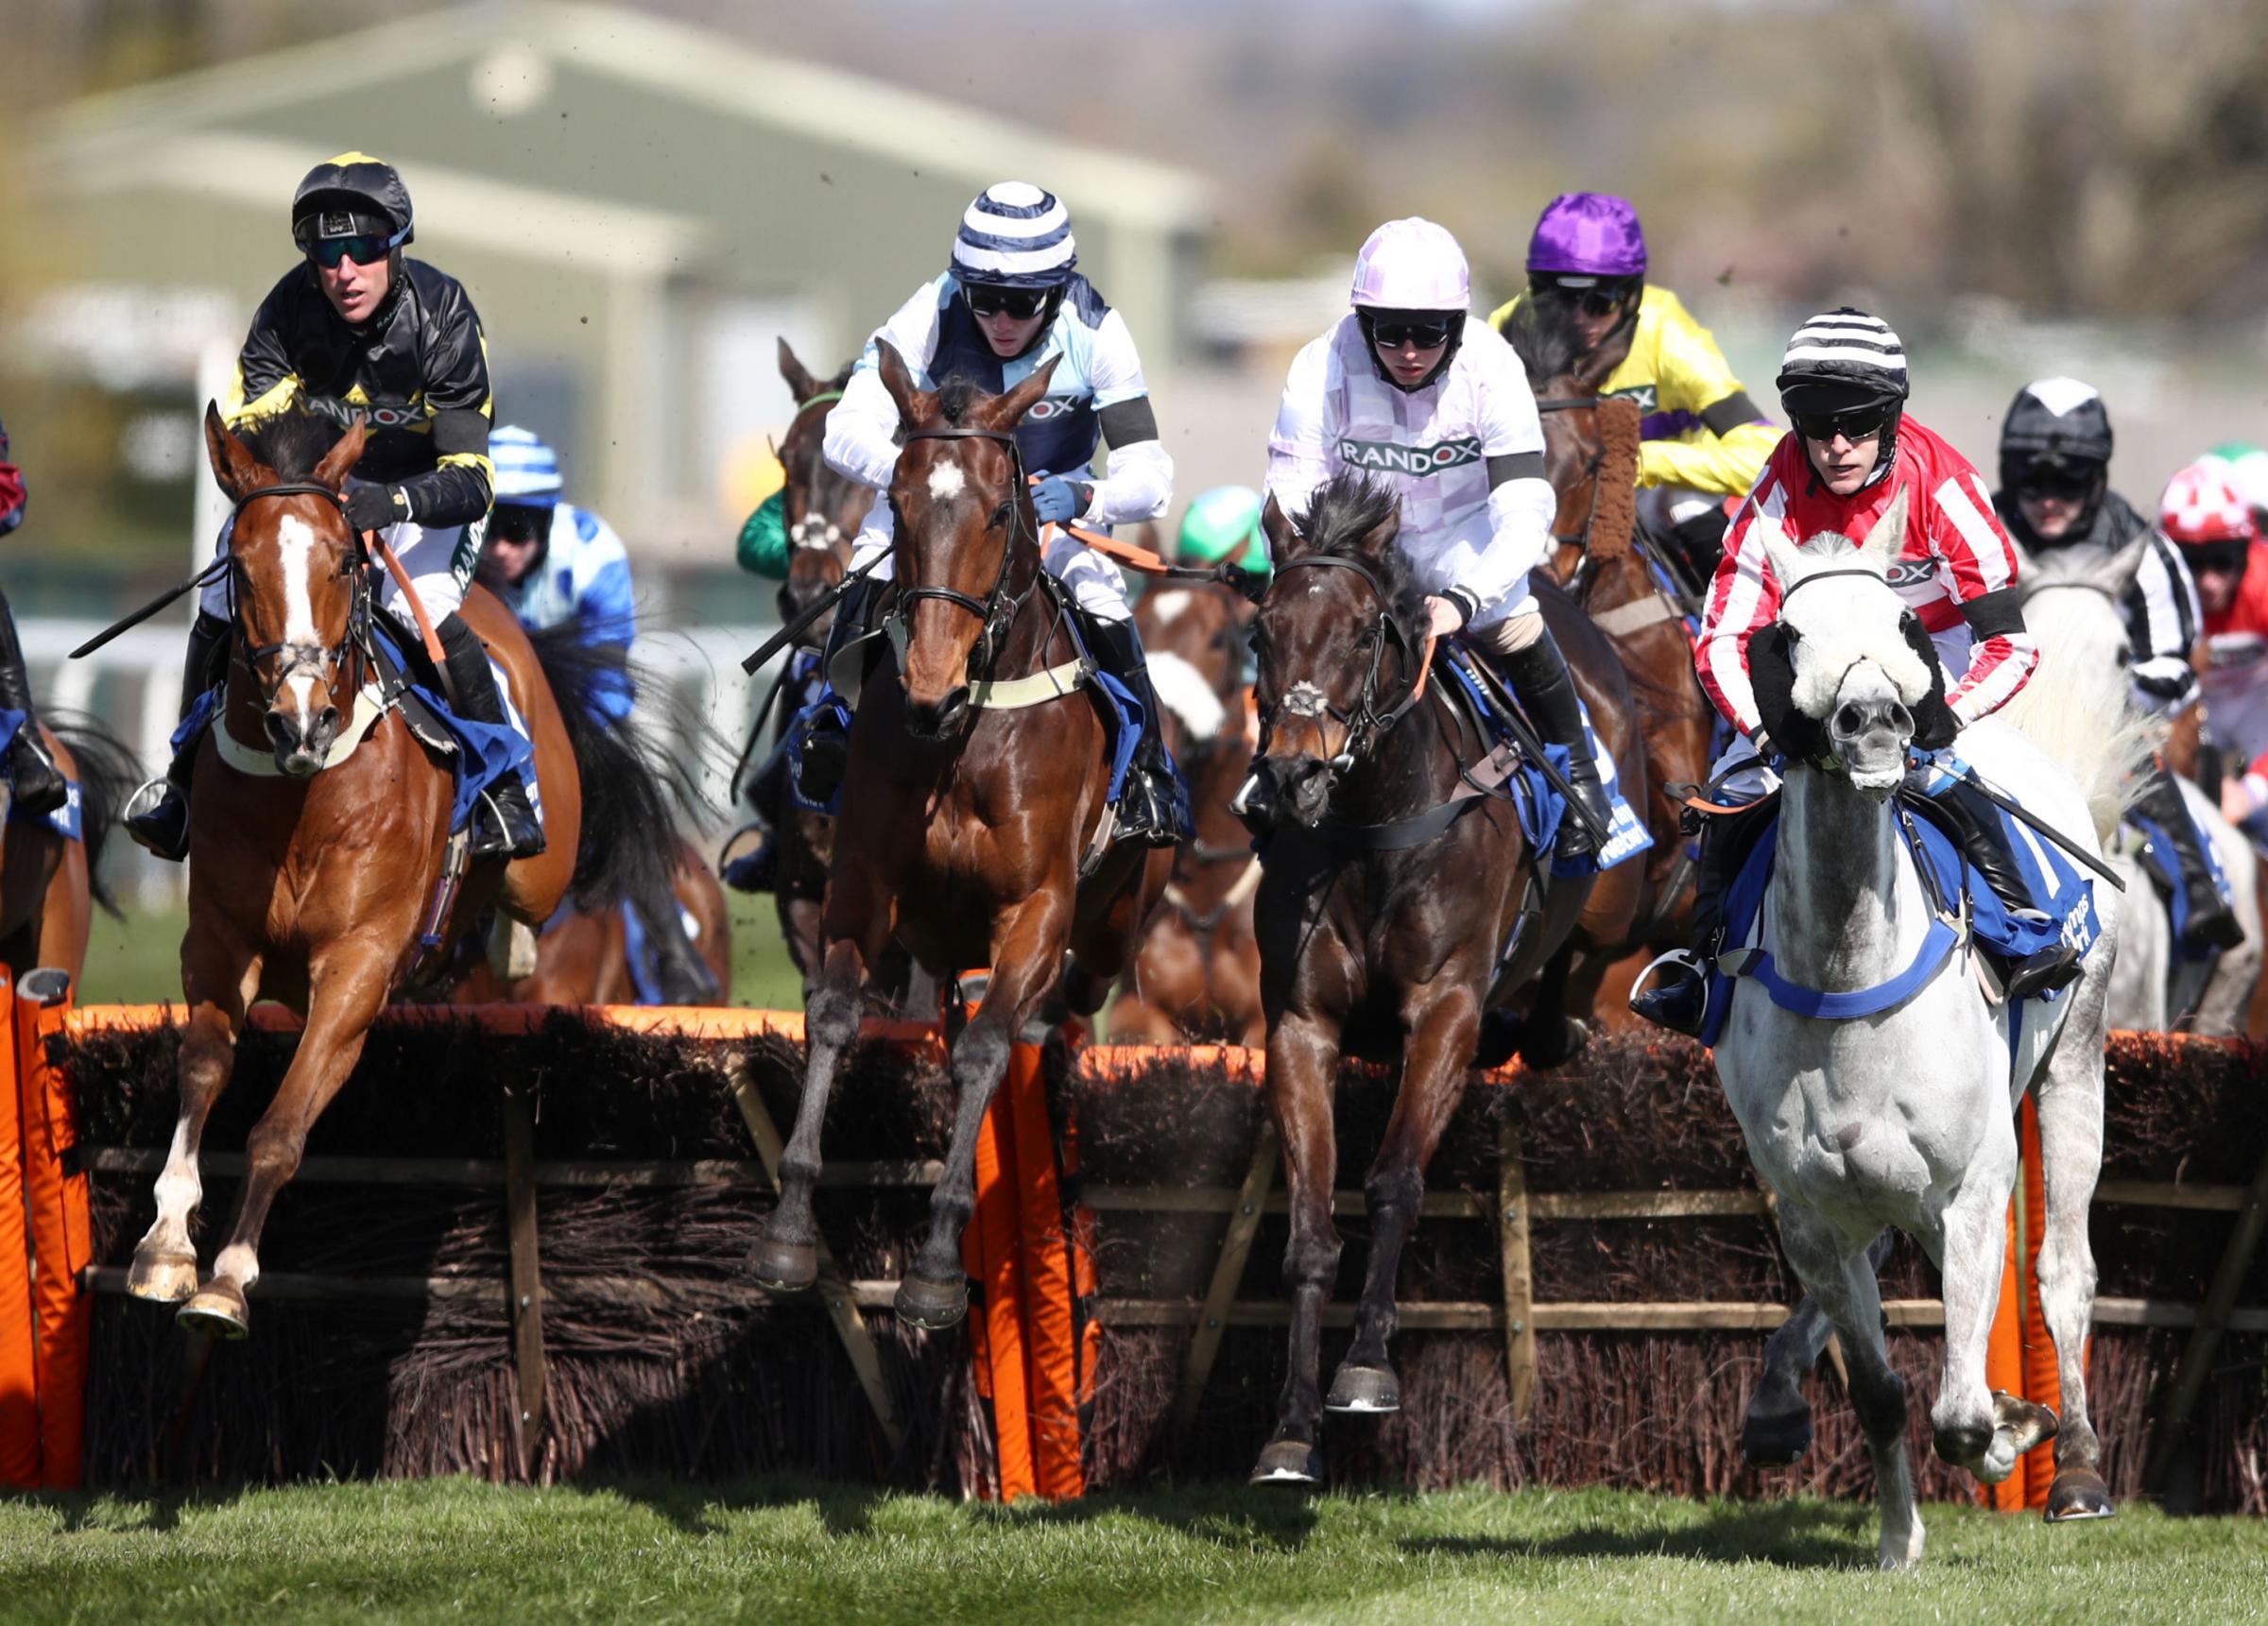 Runners and riders in the Pertemps Network Handicap Hurdle during Ladies Day of the 2021 Randox Health Grand National Festival at Aintree Racecourse, Liverpool. Picture date: Friday April 9, 2021. PA Photo. See PA story RACING Aintree. Photo credit